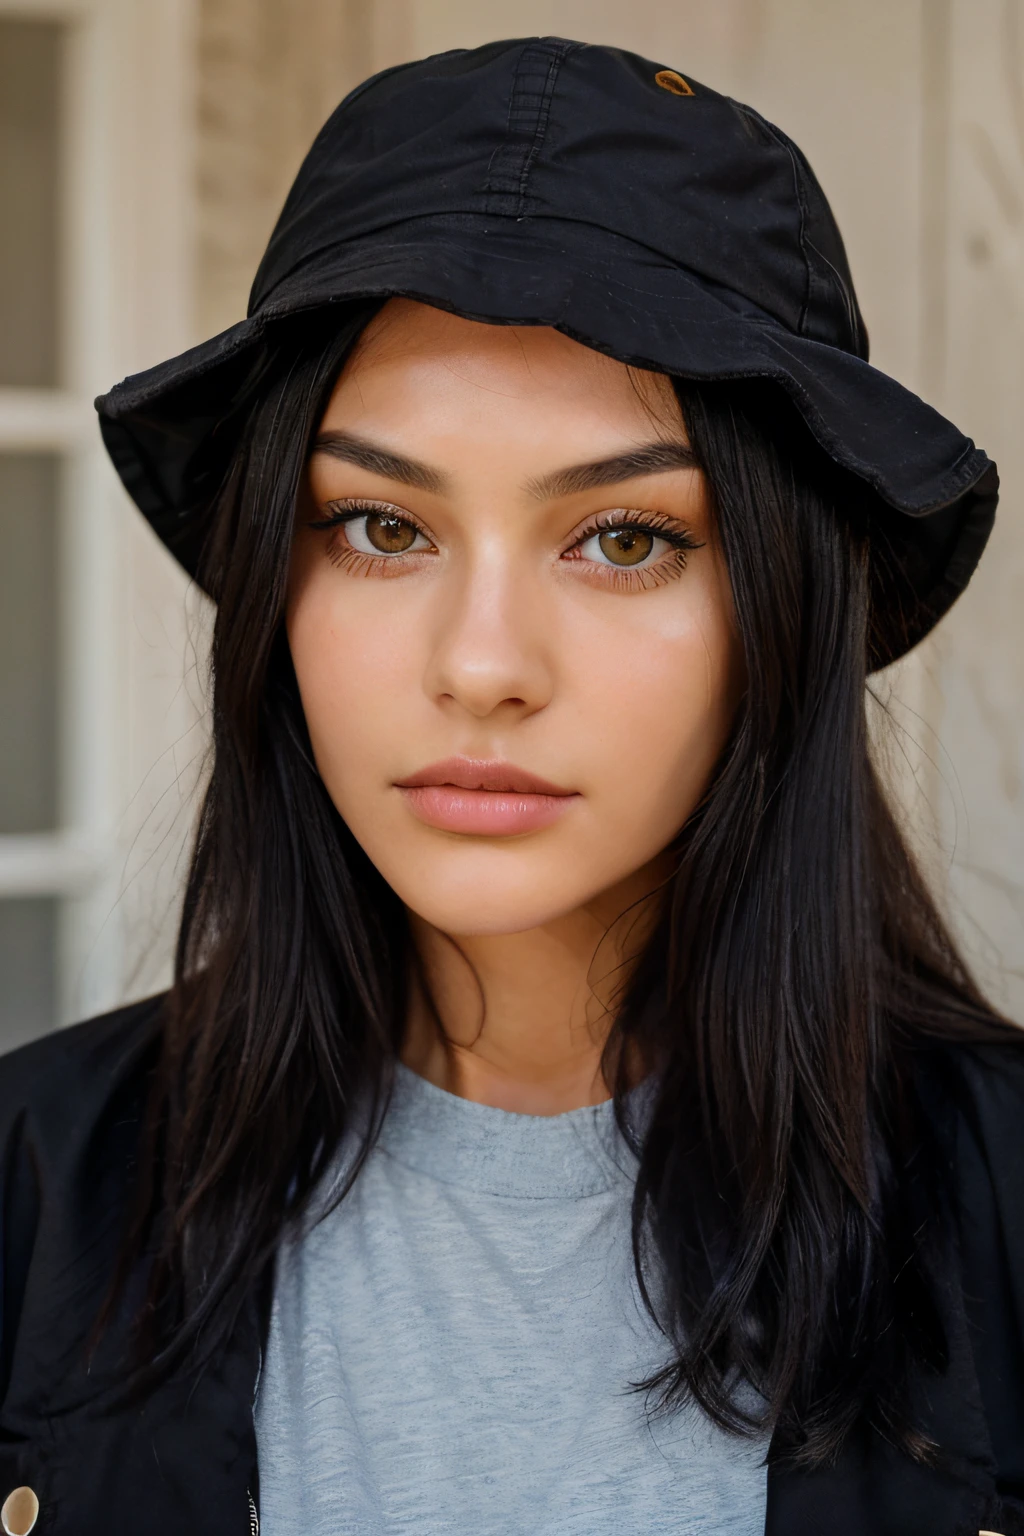 A 23-year-old woman with black hair and wearing a 'bucket hat' hat, Looking  directly